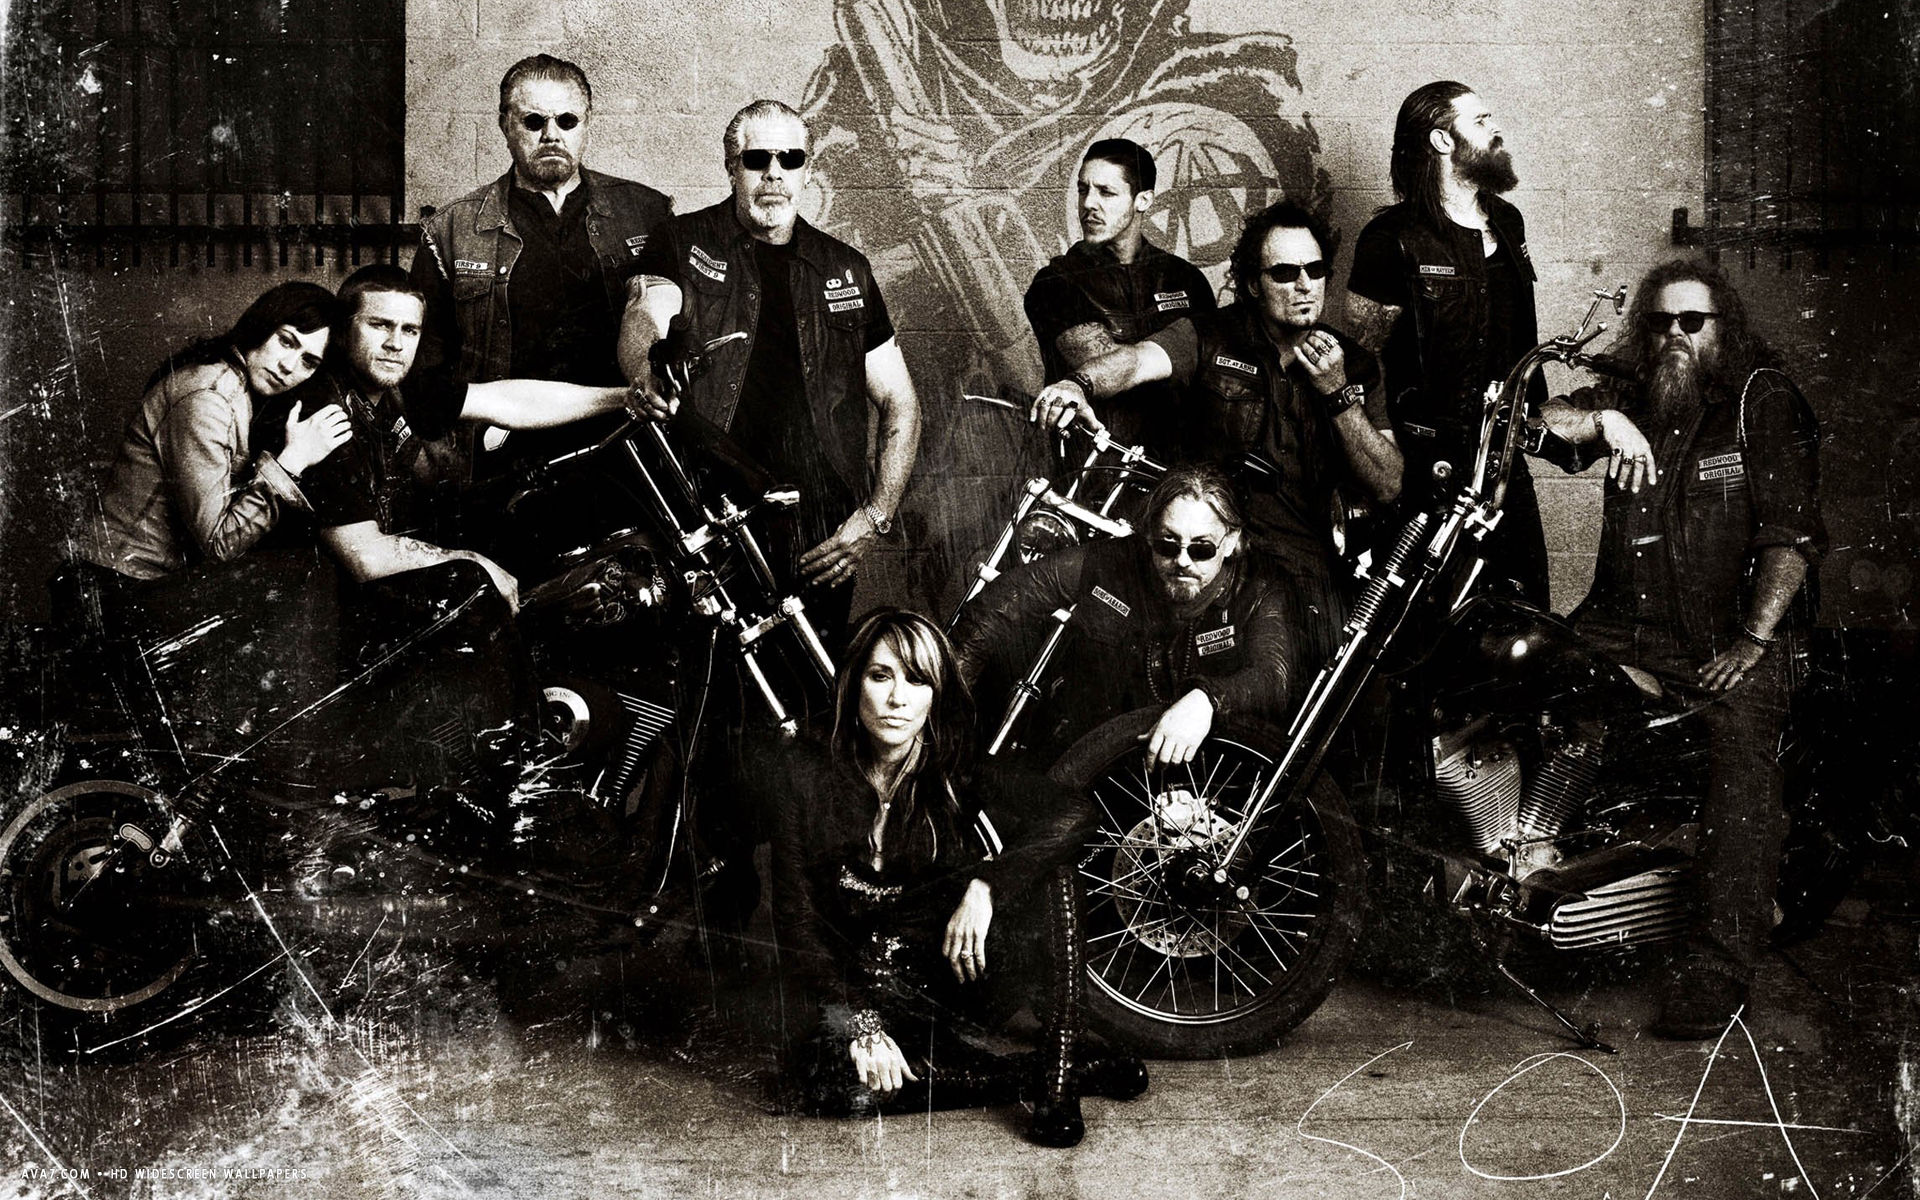 Sons of anarchy pics wallpaper